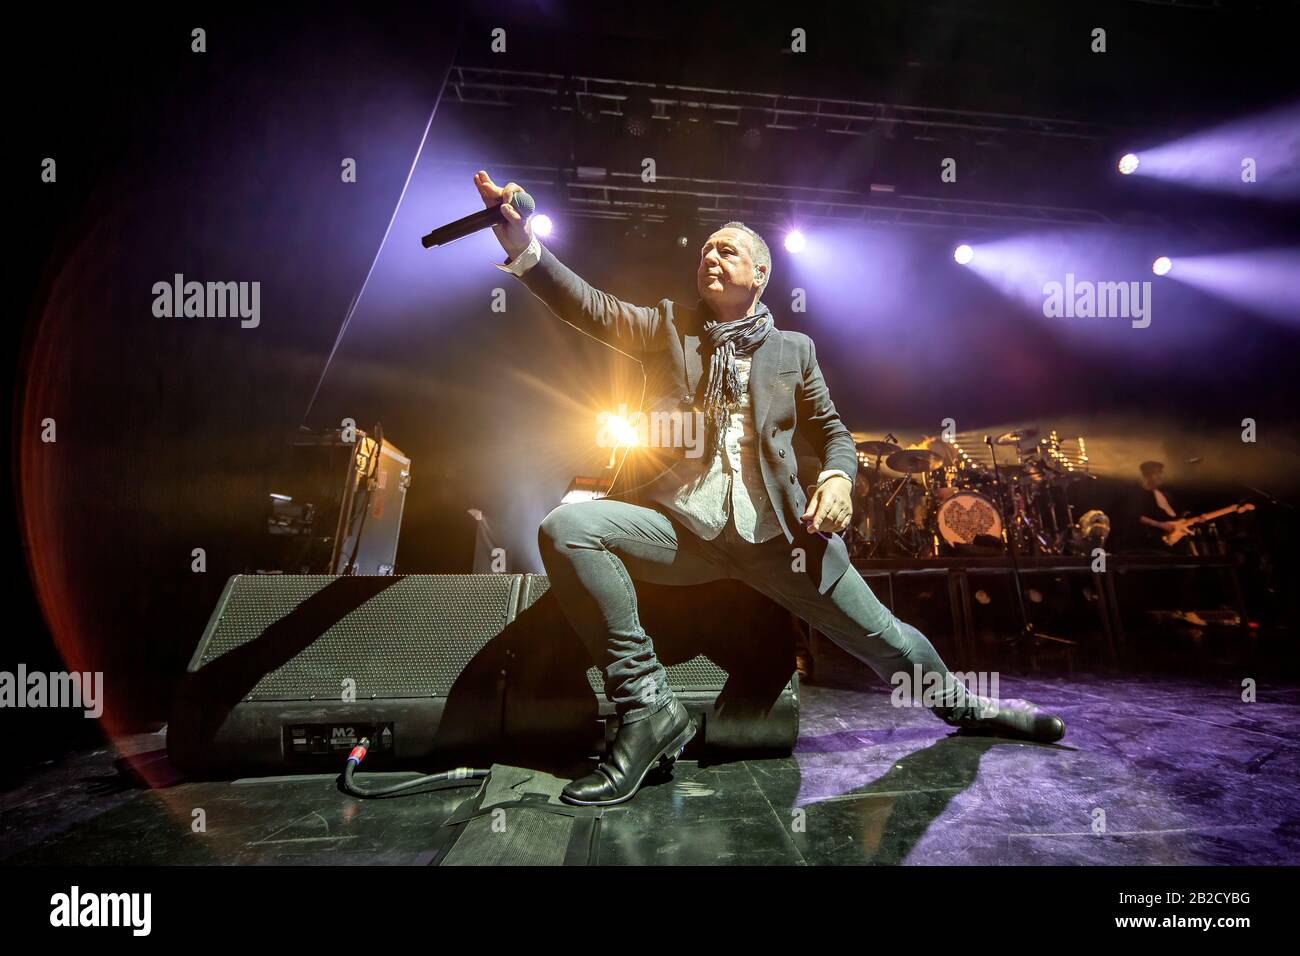 Oslo, Norway. 01st Mar, 2020. The Scottish rock band Simple Minds performs  a live concert at Sentrum Scene in Oslo. Here singer, songwriter and  musician Jim Kerr is seen live on stage. (